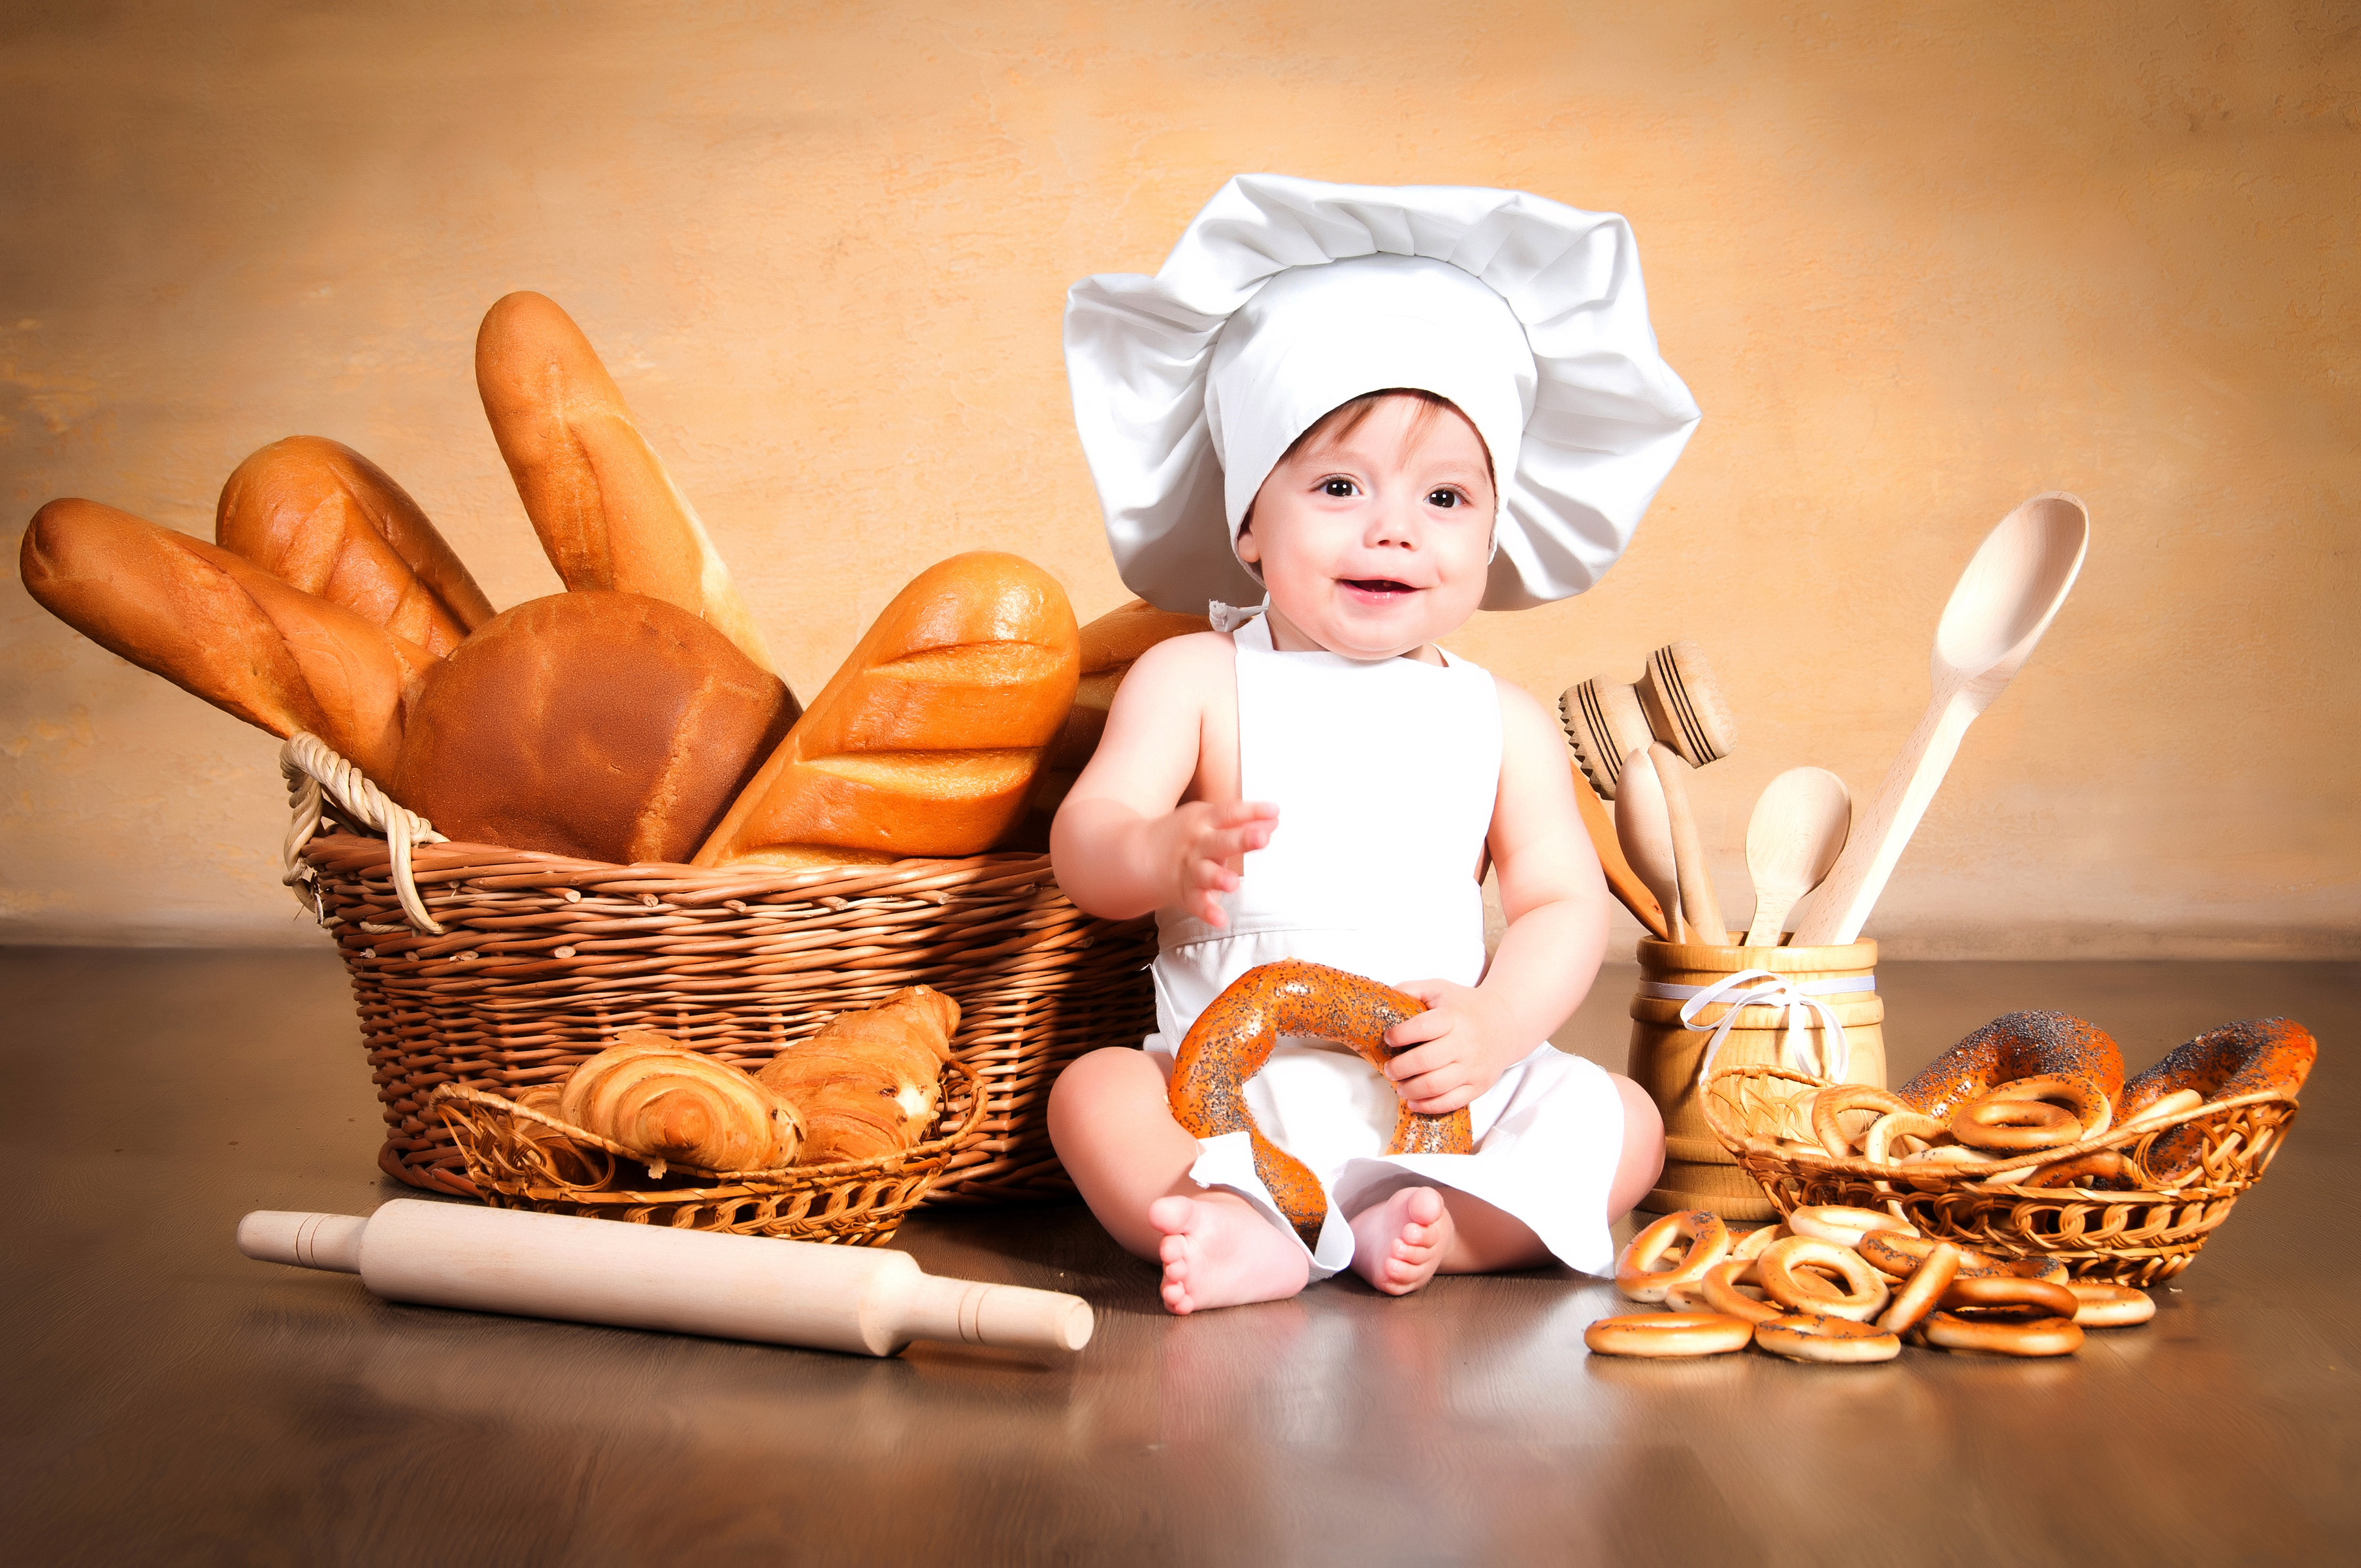 photography, baby, bread, chef, cute